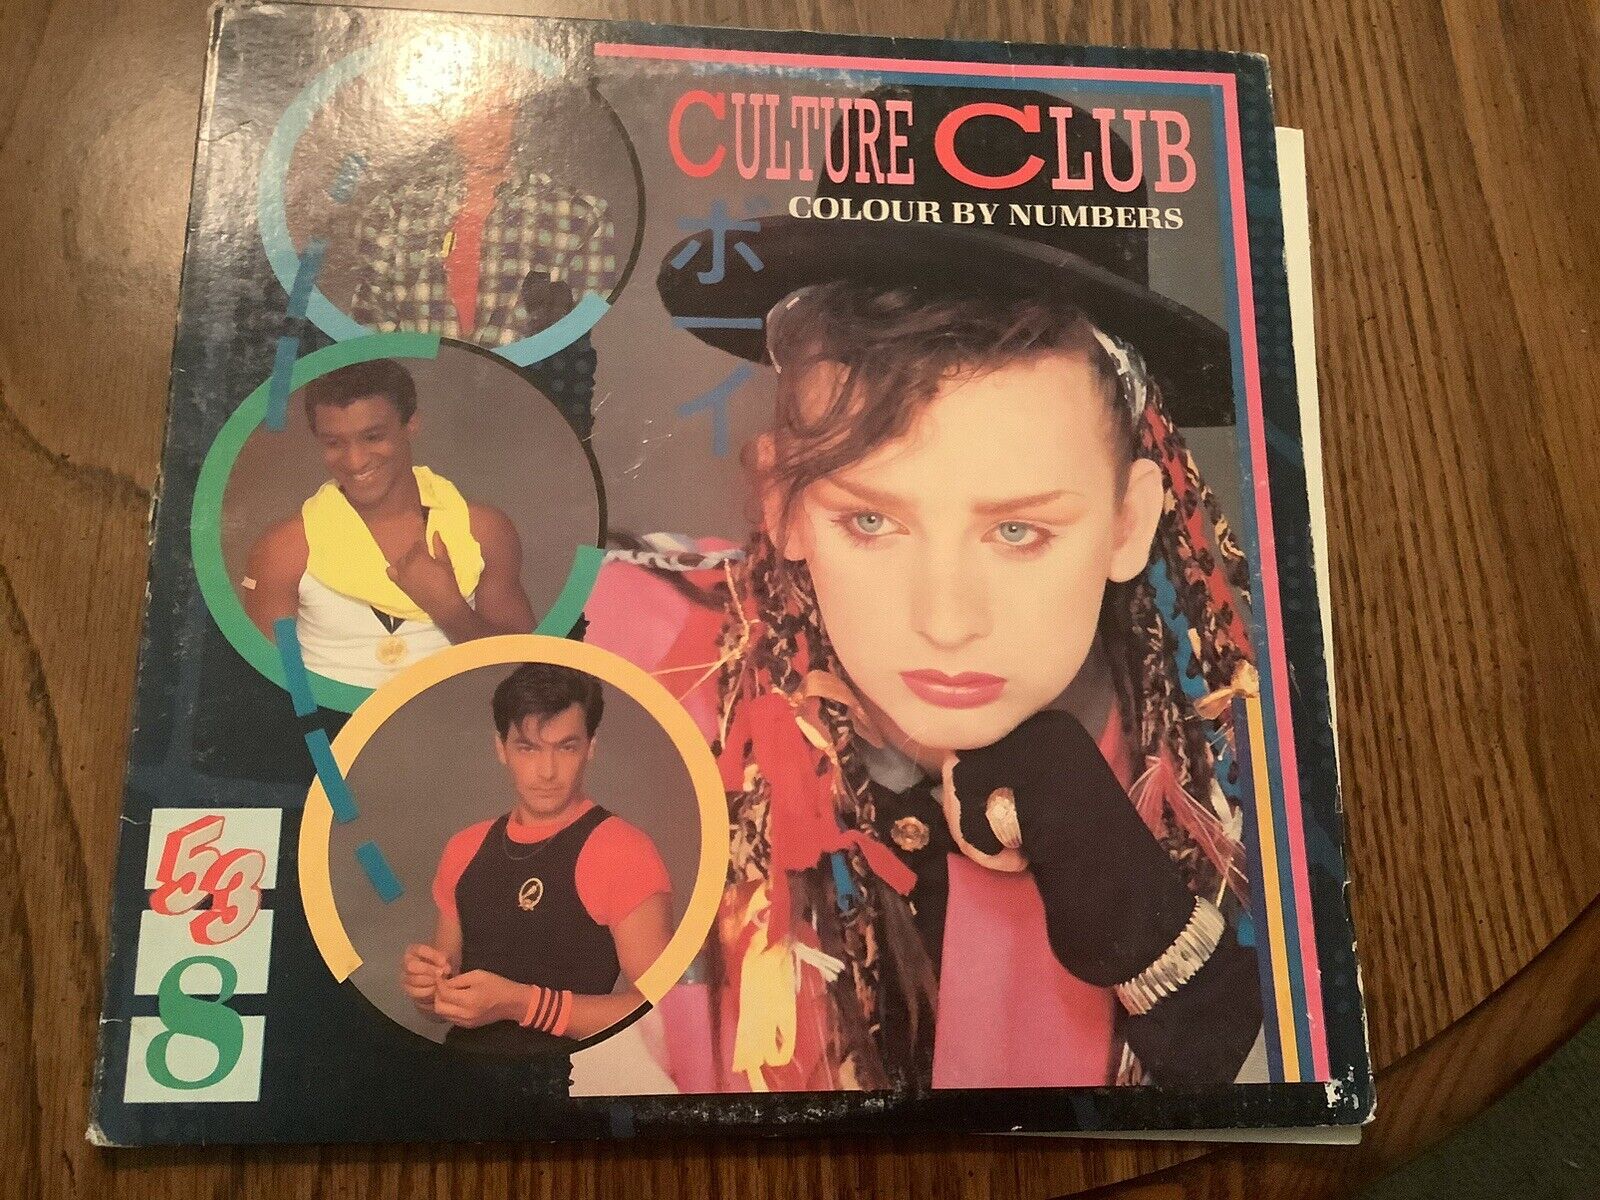 Culture Club Colour By Numbers Record LP Vintage 1983 Virgin Records QE39107